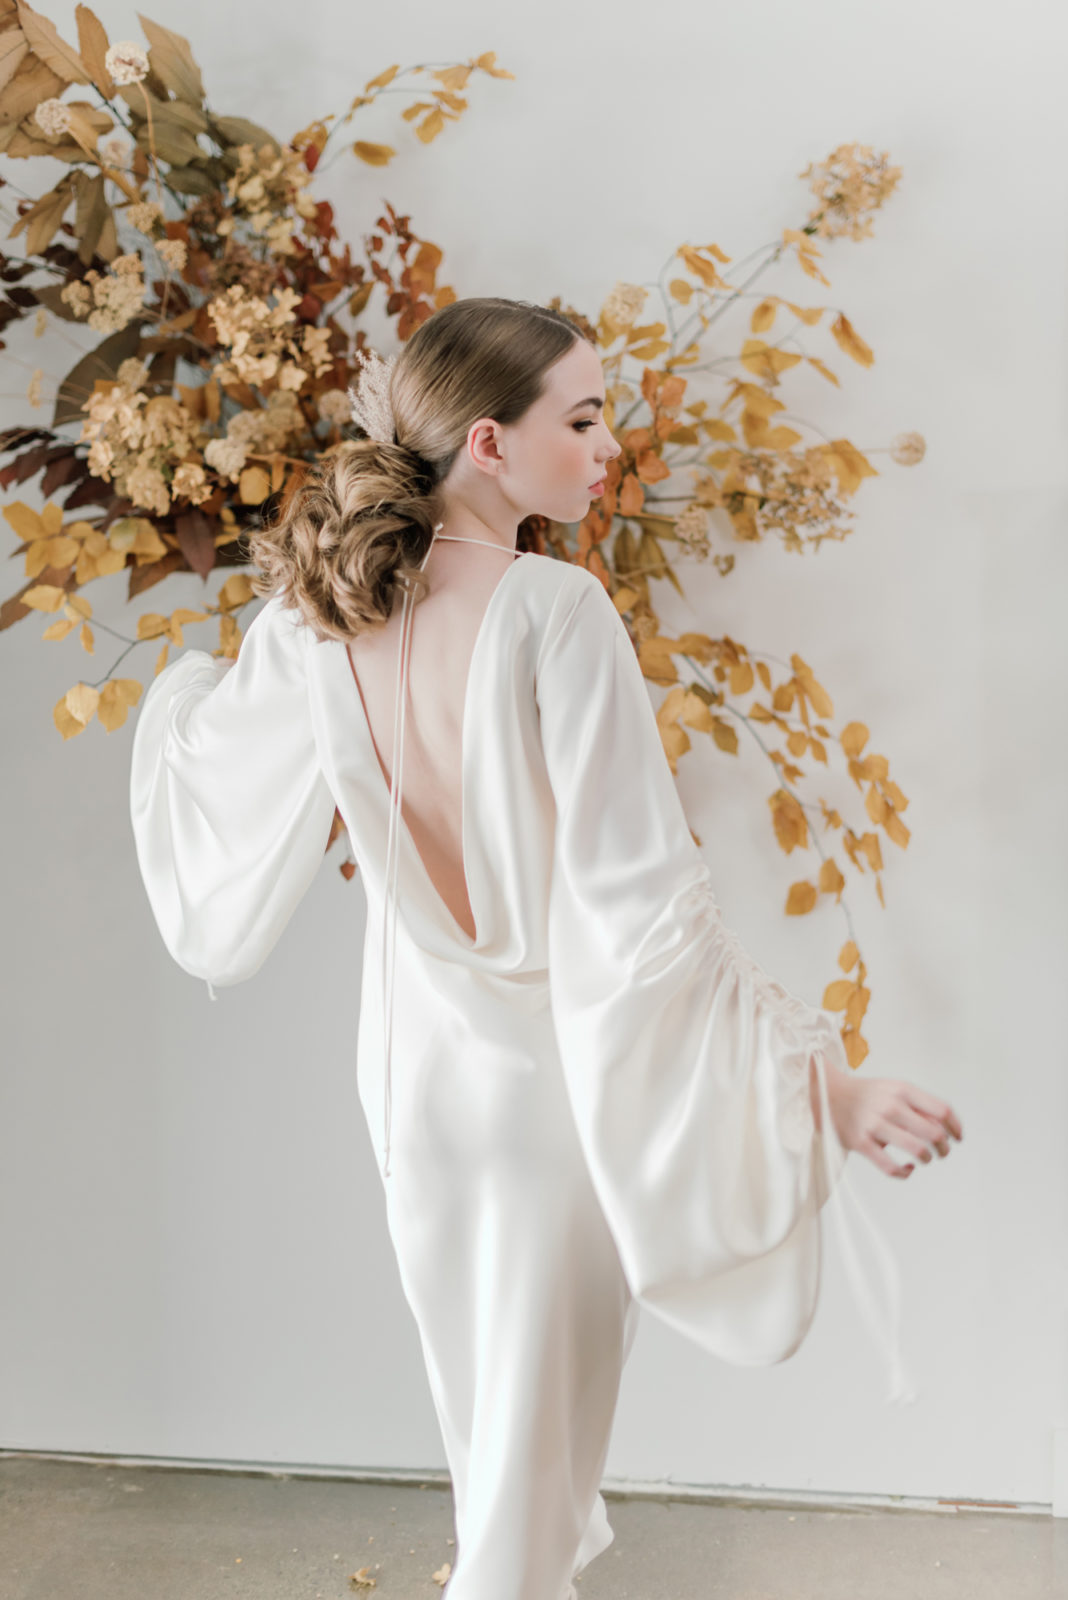 modern bridal style, autumn bridal looks, fall floral bouquet inspiration, sating wedding gown